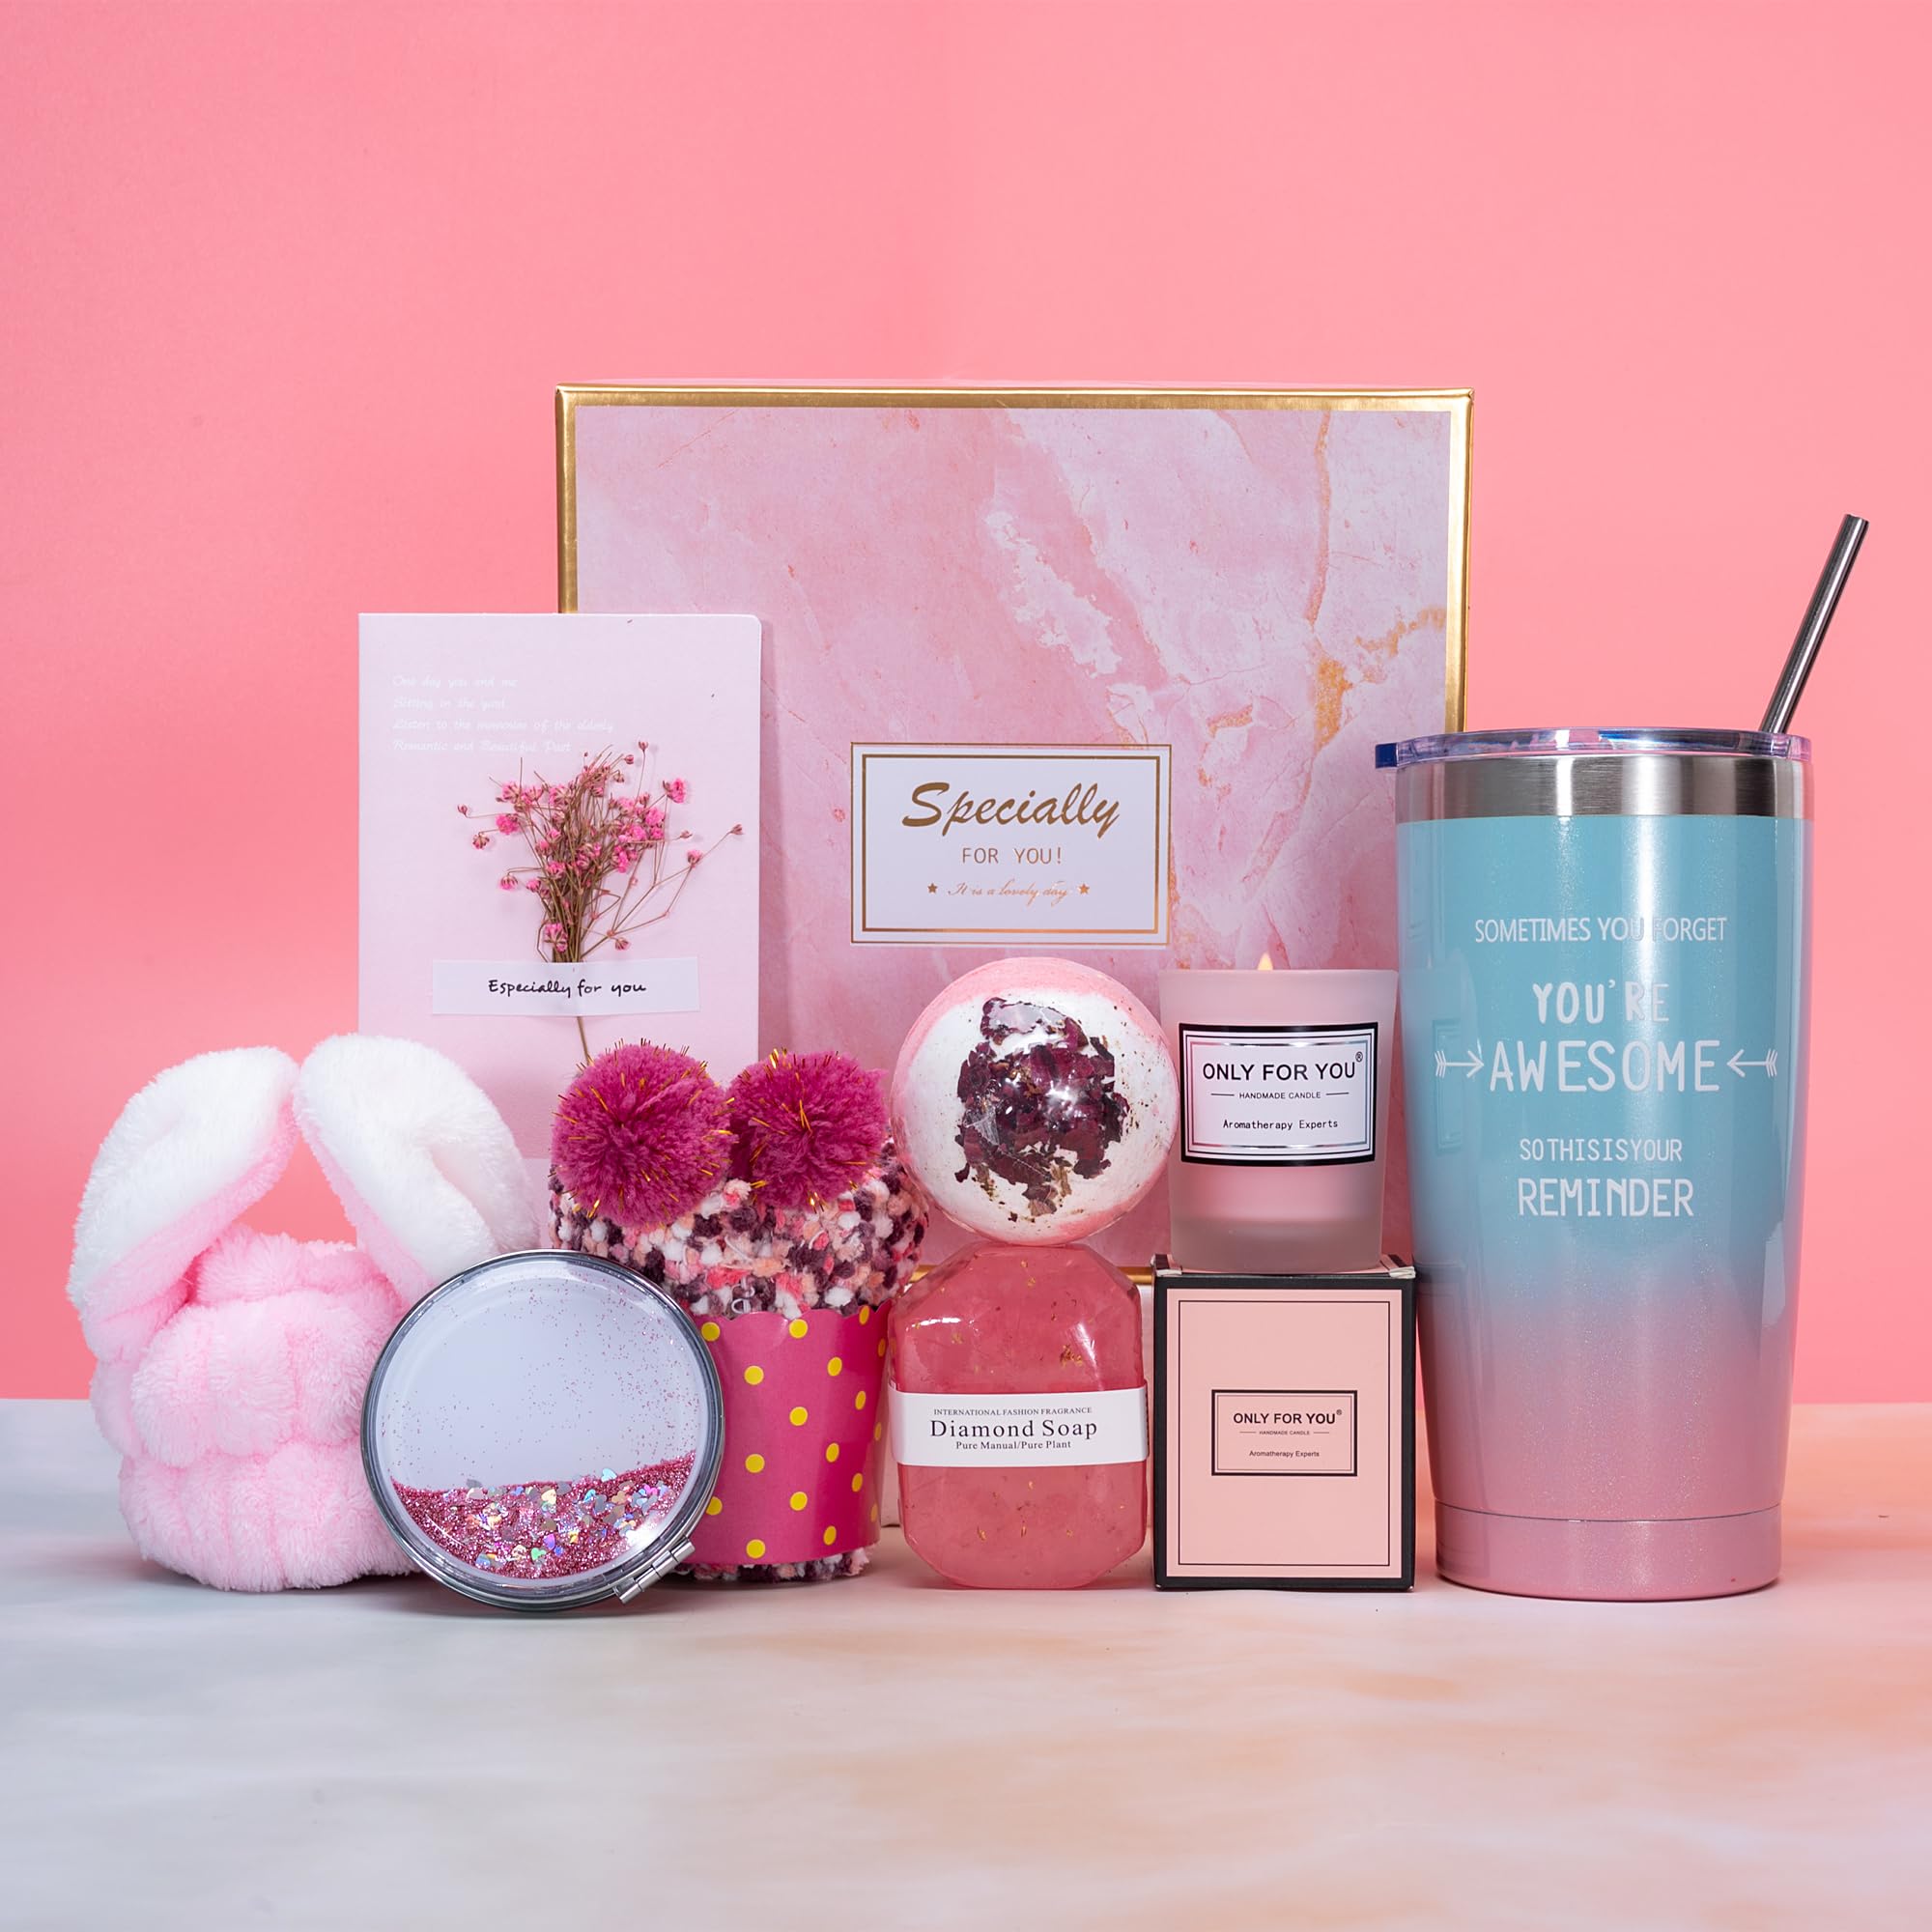 Buy Gifts for Mom - Mom Gifts Set Includes Sterling Silver  Necklace,Earrings,Pink Heart Marble Jewelry Trays,Pink Marble Mug, Scented  Candle and Flower � Best Mother's Day Birthday Gift Set Online at Low